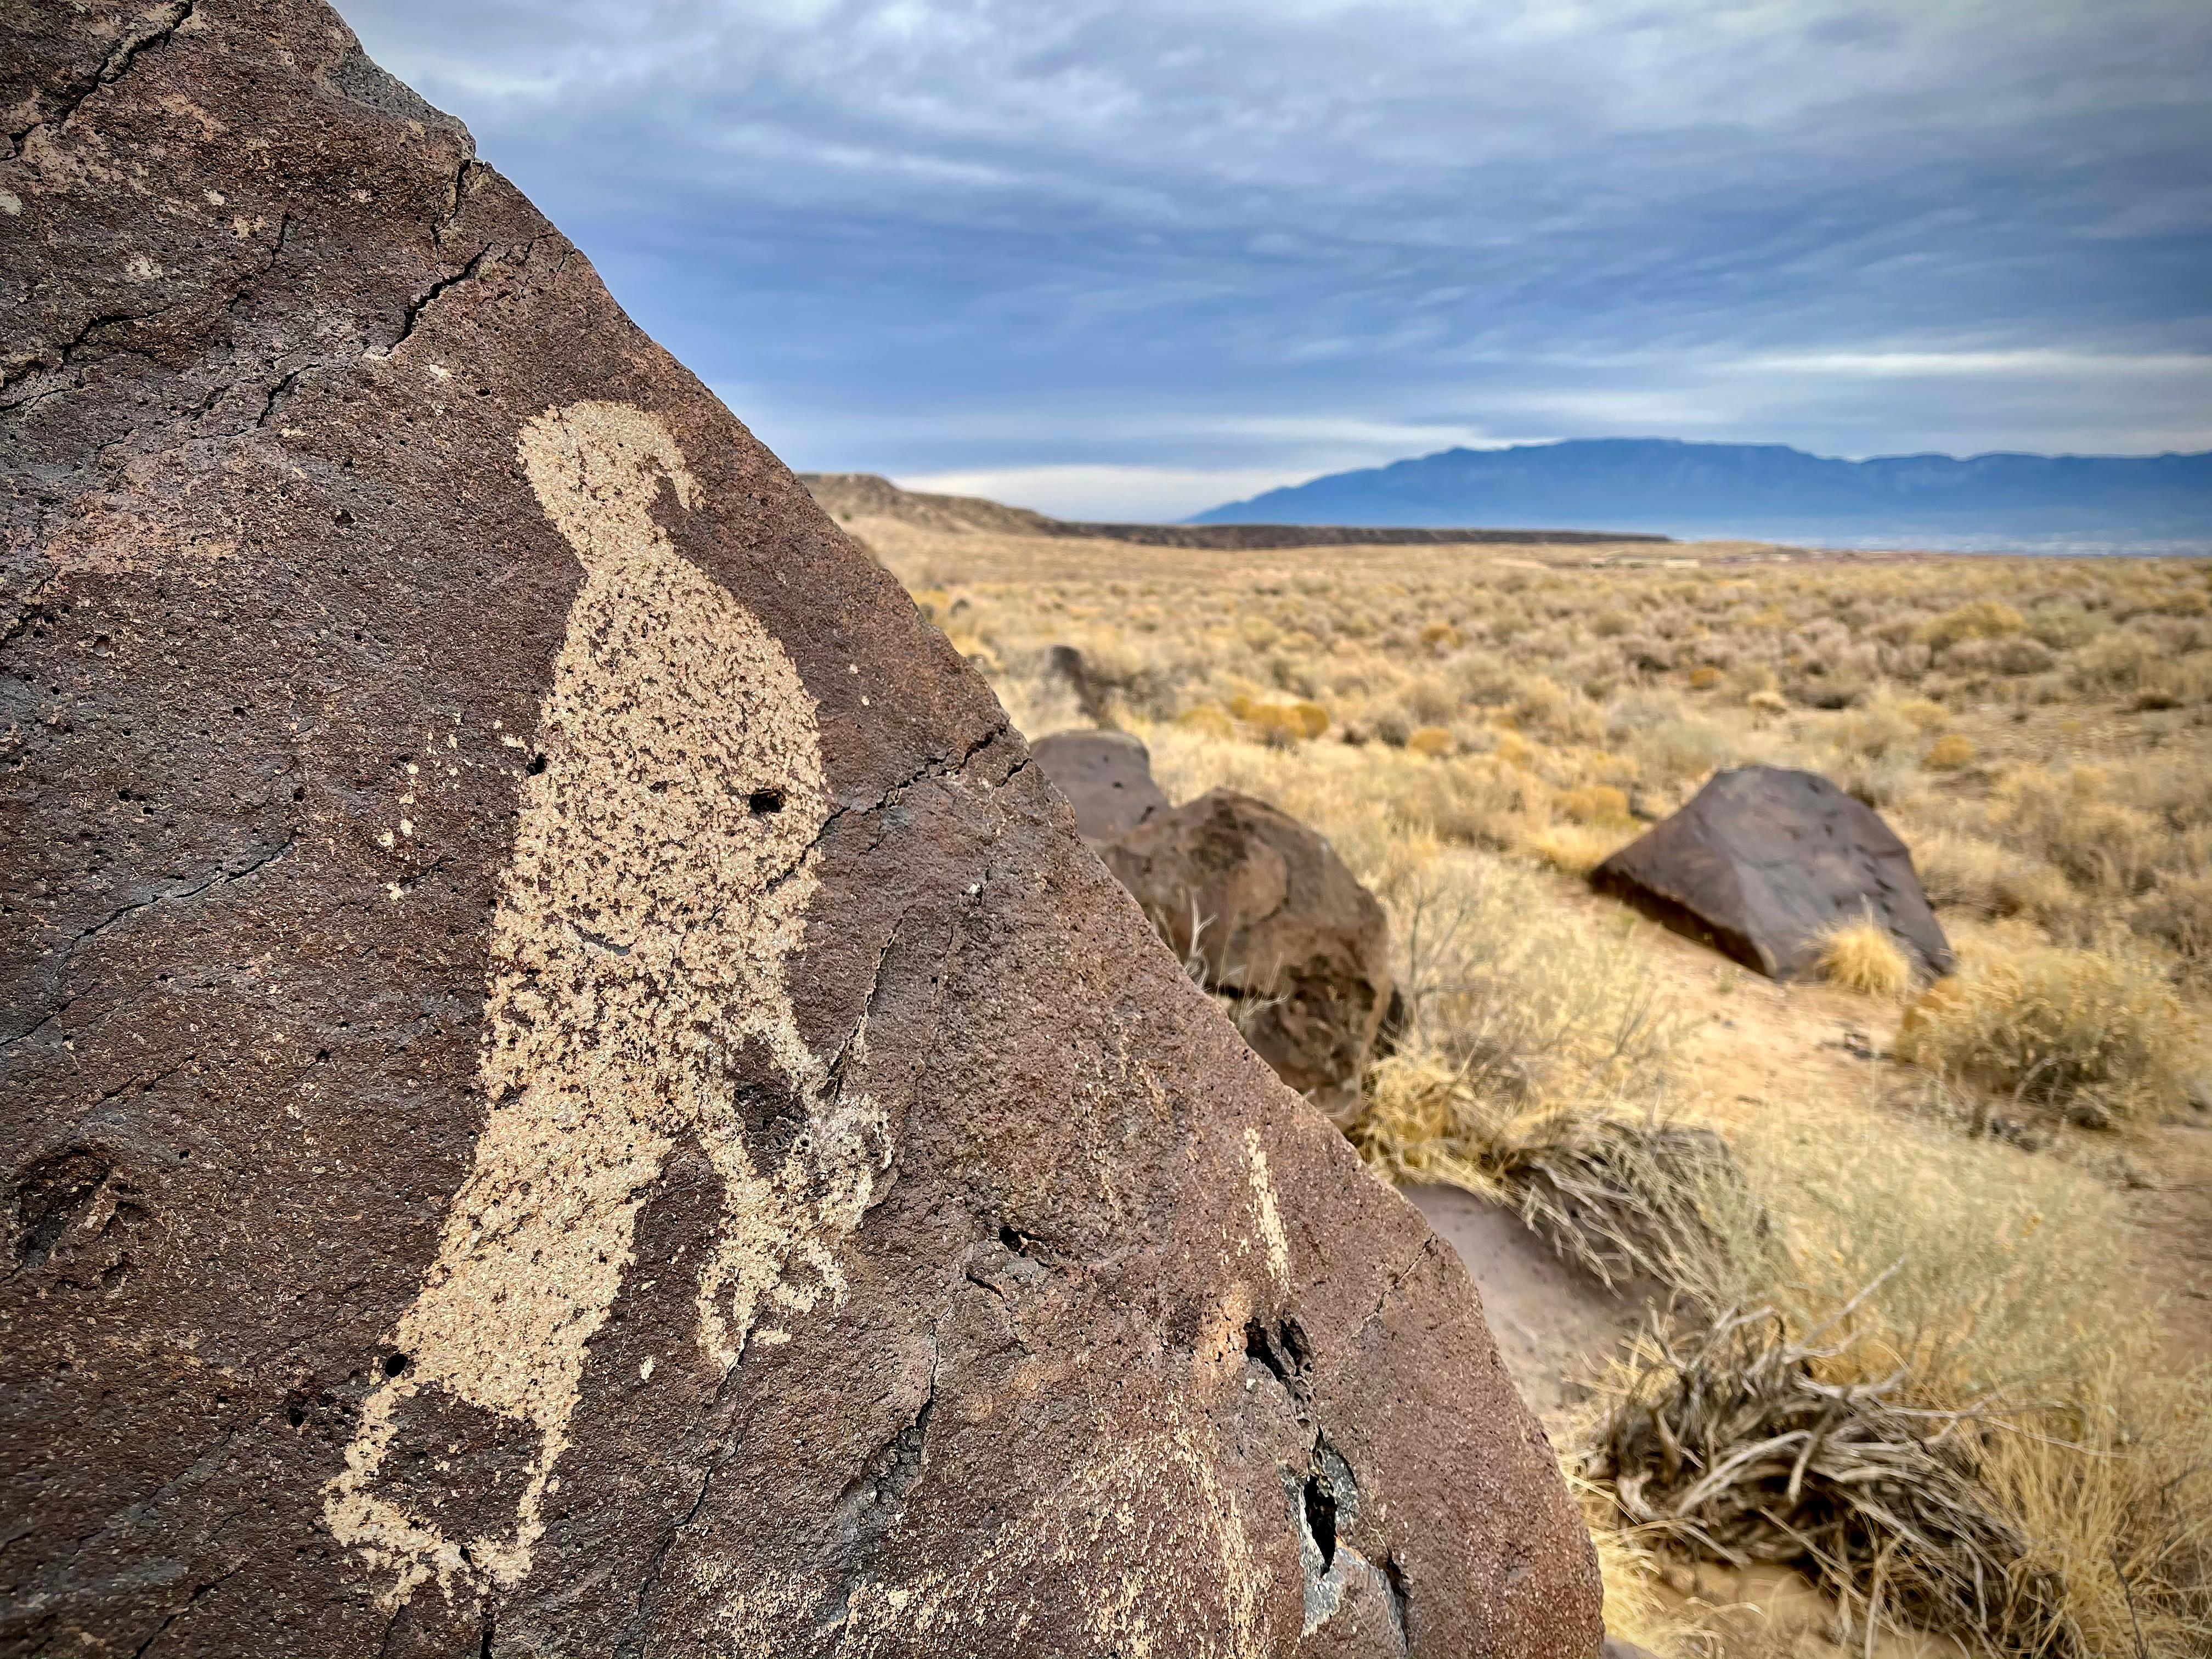 A petroglyph of a hawk on a dark boulder with a cloudy sky and mountains in the background.